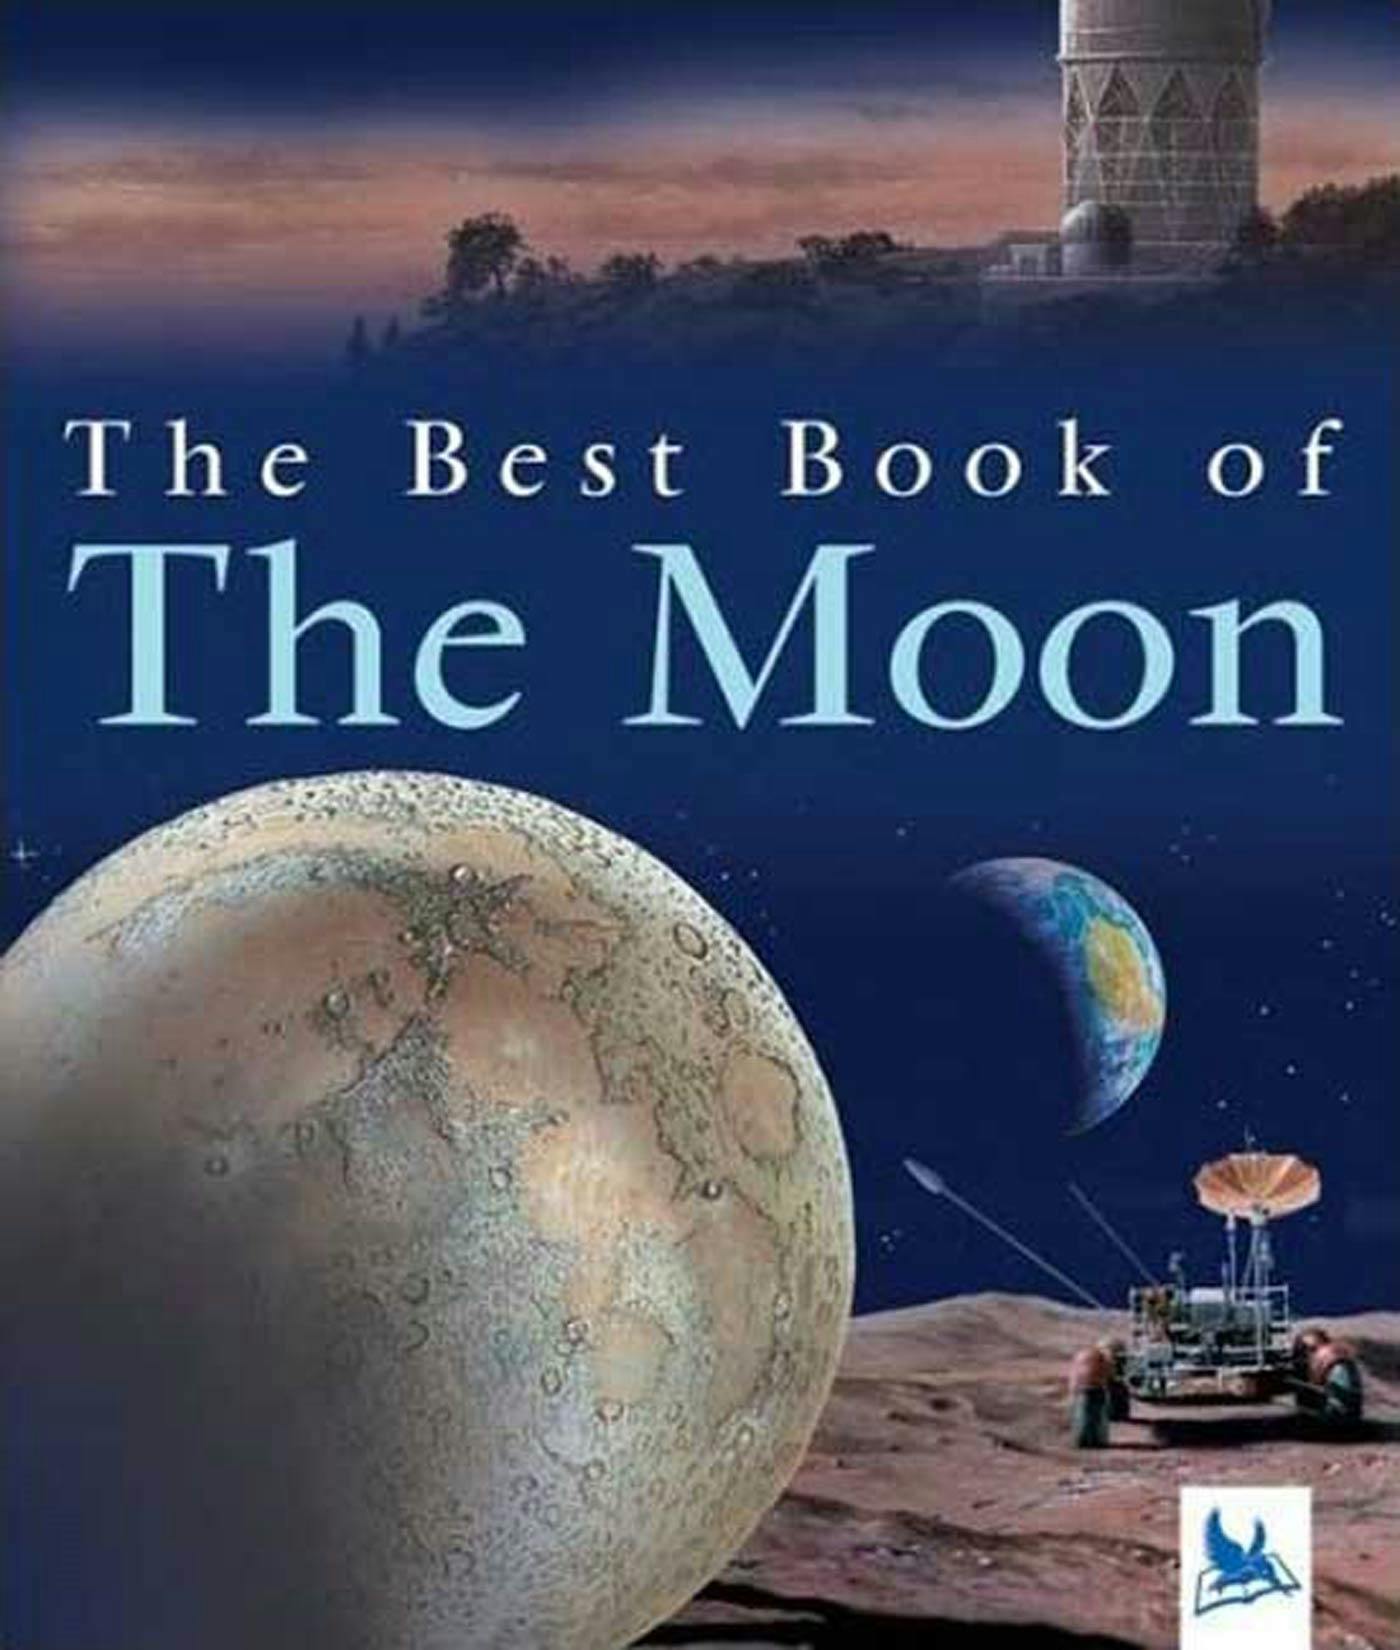 Image of The Best Book of the Moon